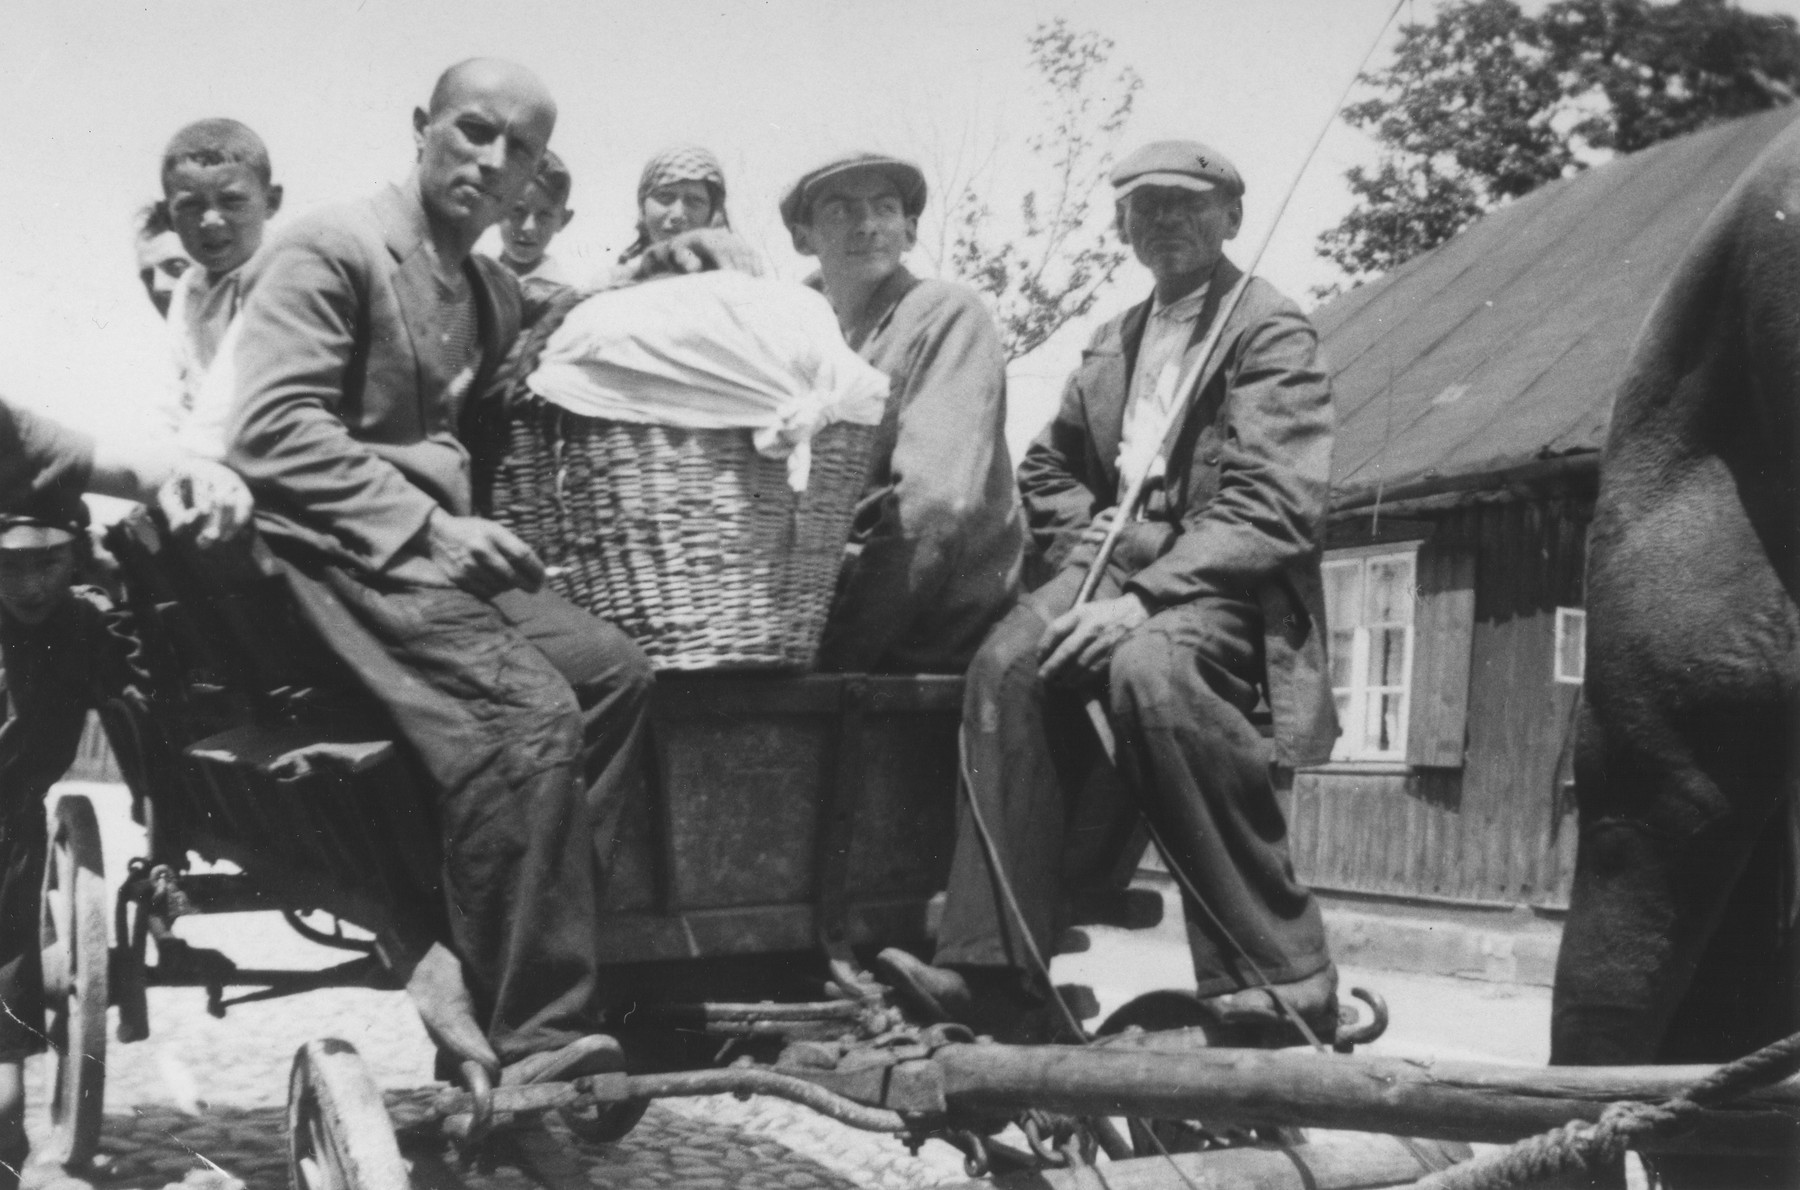 A group of Jews rides on the back of a horse-drawn wagon in Piotrkow Trybunalski, Poland.

The group is on their way to a neighboring town where the man with the basket will sell his wares.

Among those pictured are Reuven Fish, Shaya Wolrajch, Hersh Lieb Wolrajch, Chiemic and Wolf.